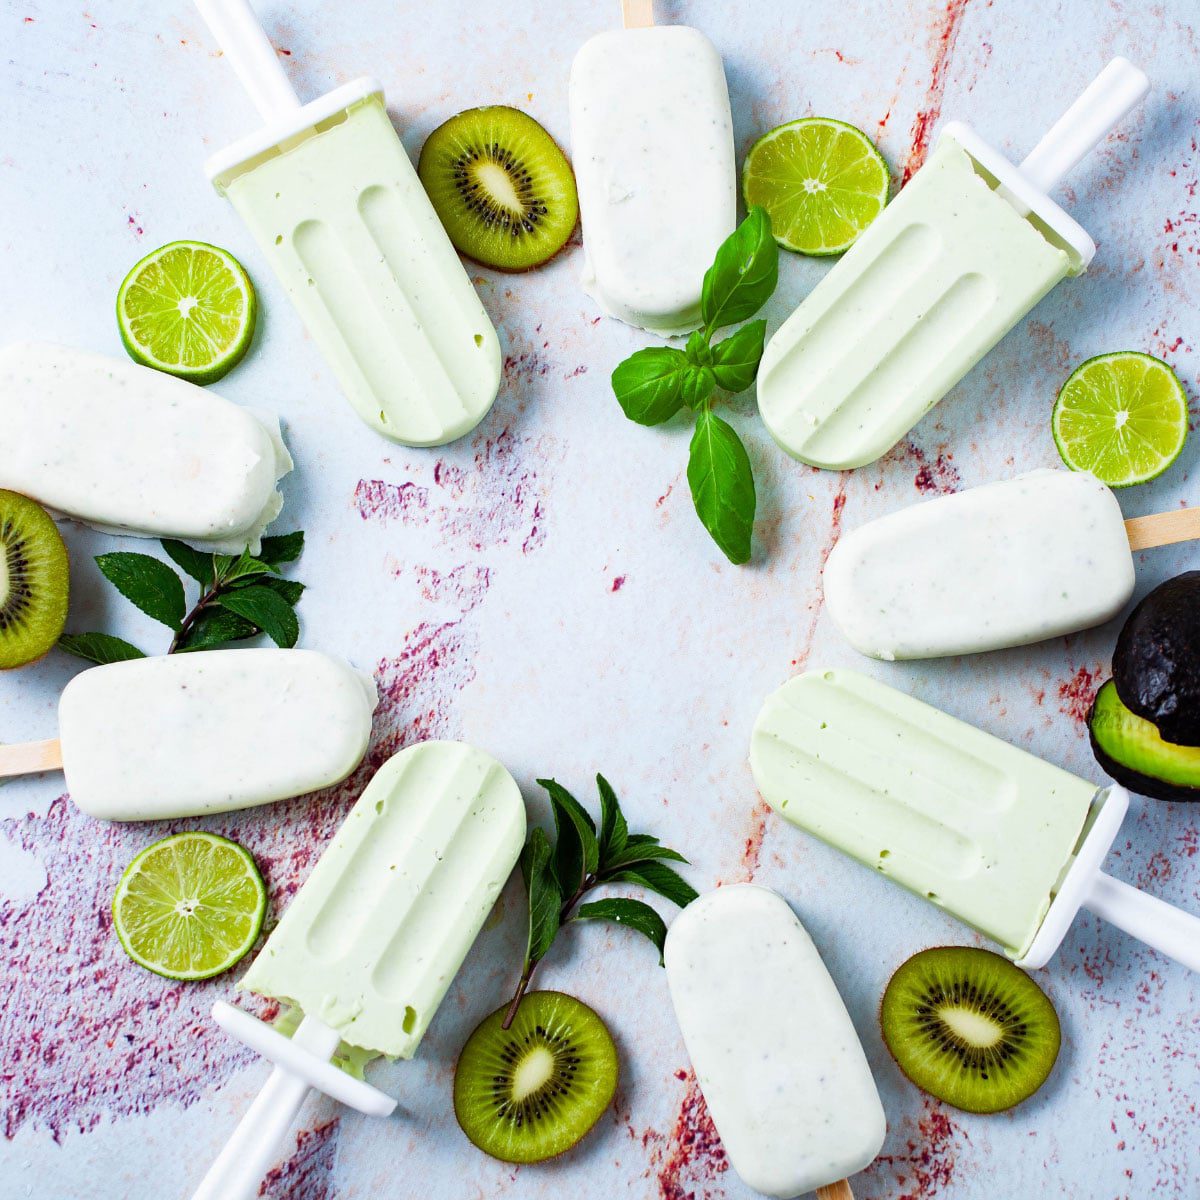 A circle of homemade sugar free popsicles with fresh kiwi and lime slices and mint leaves on a marbled background.